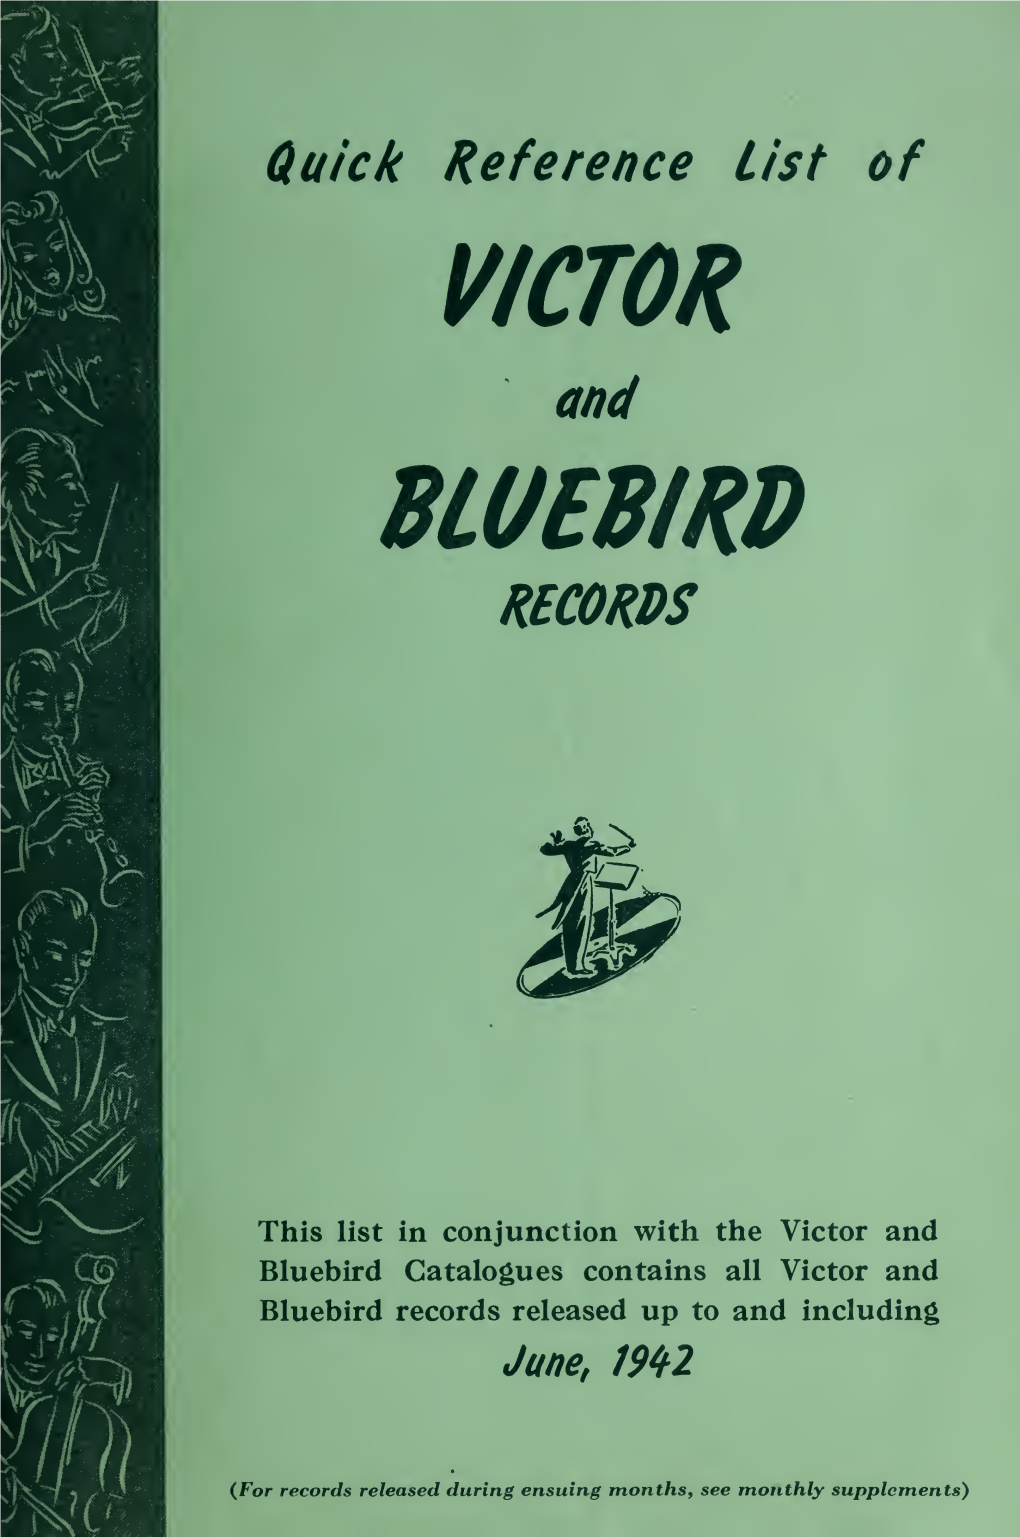 Quick Reference List of VICTOR and BLUEBIRD RECORDS